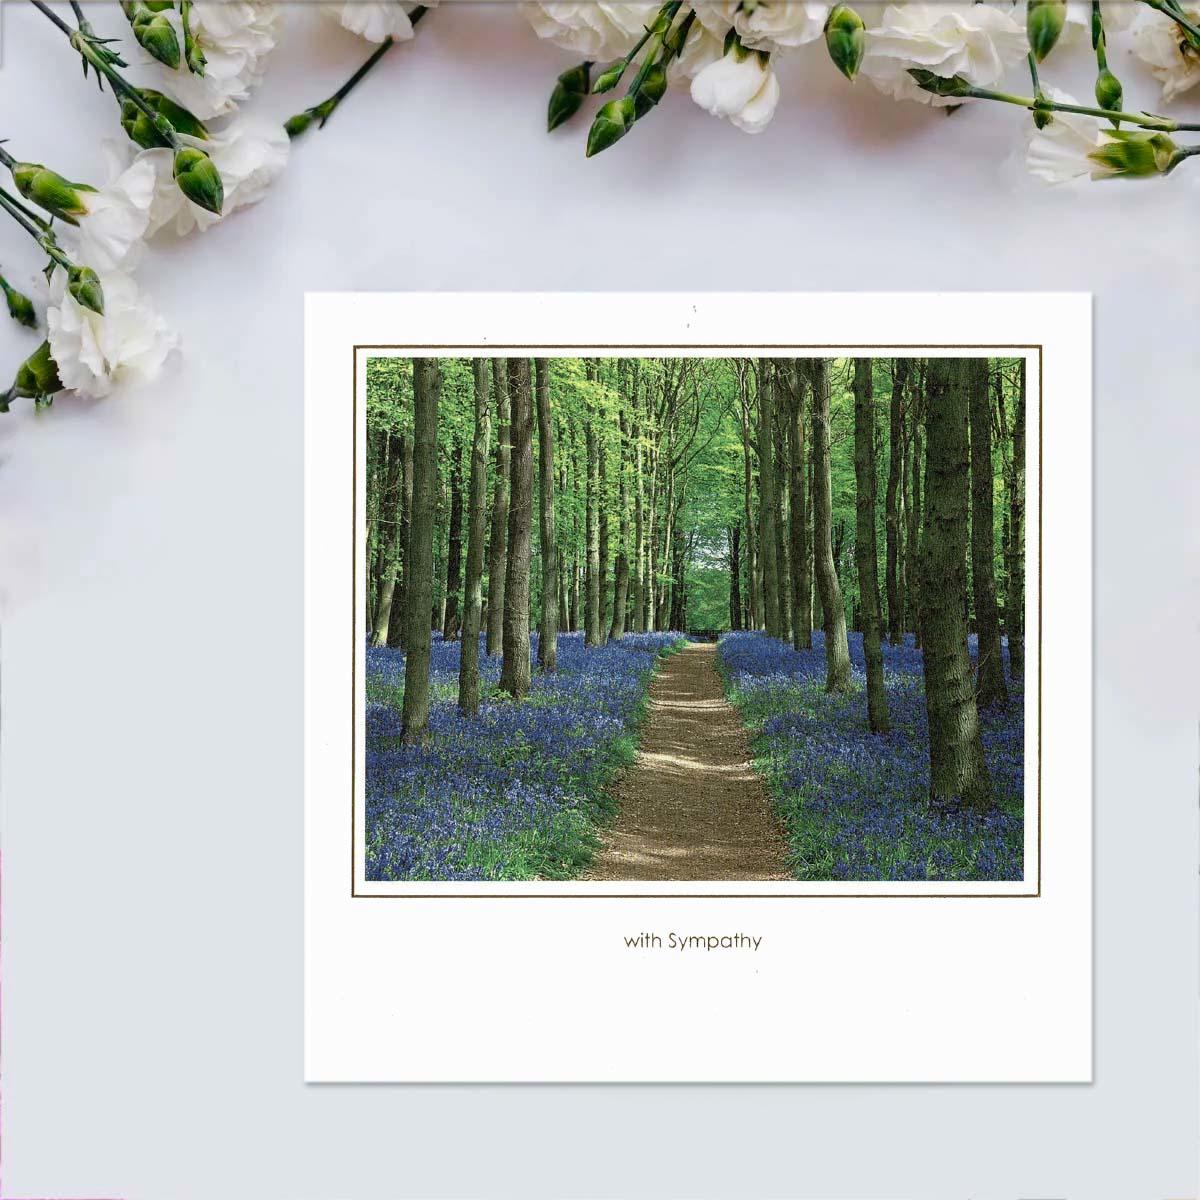 Photographic -With Sympathy Bluebell Woods Card Front Image